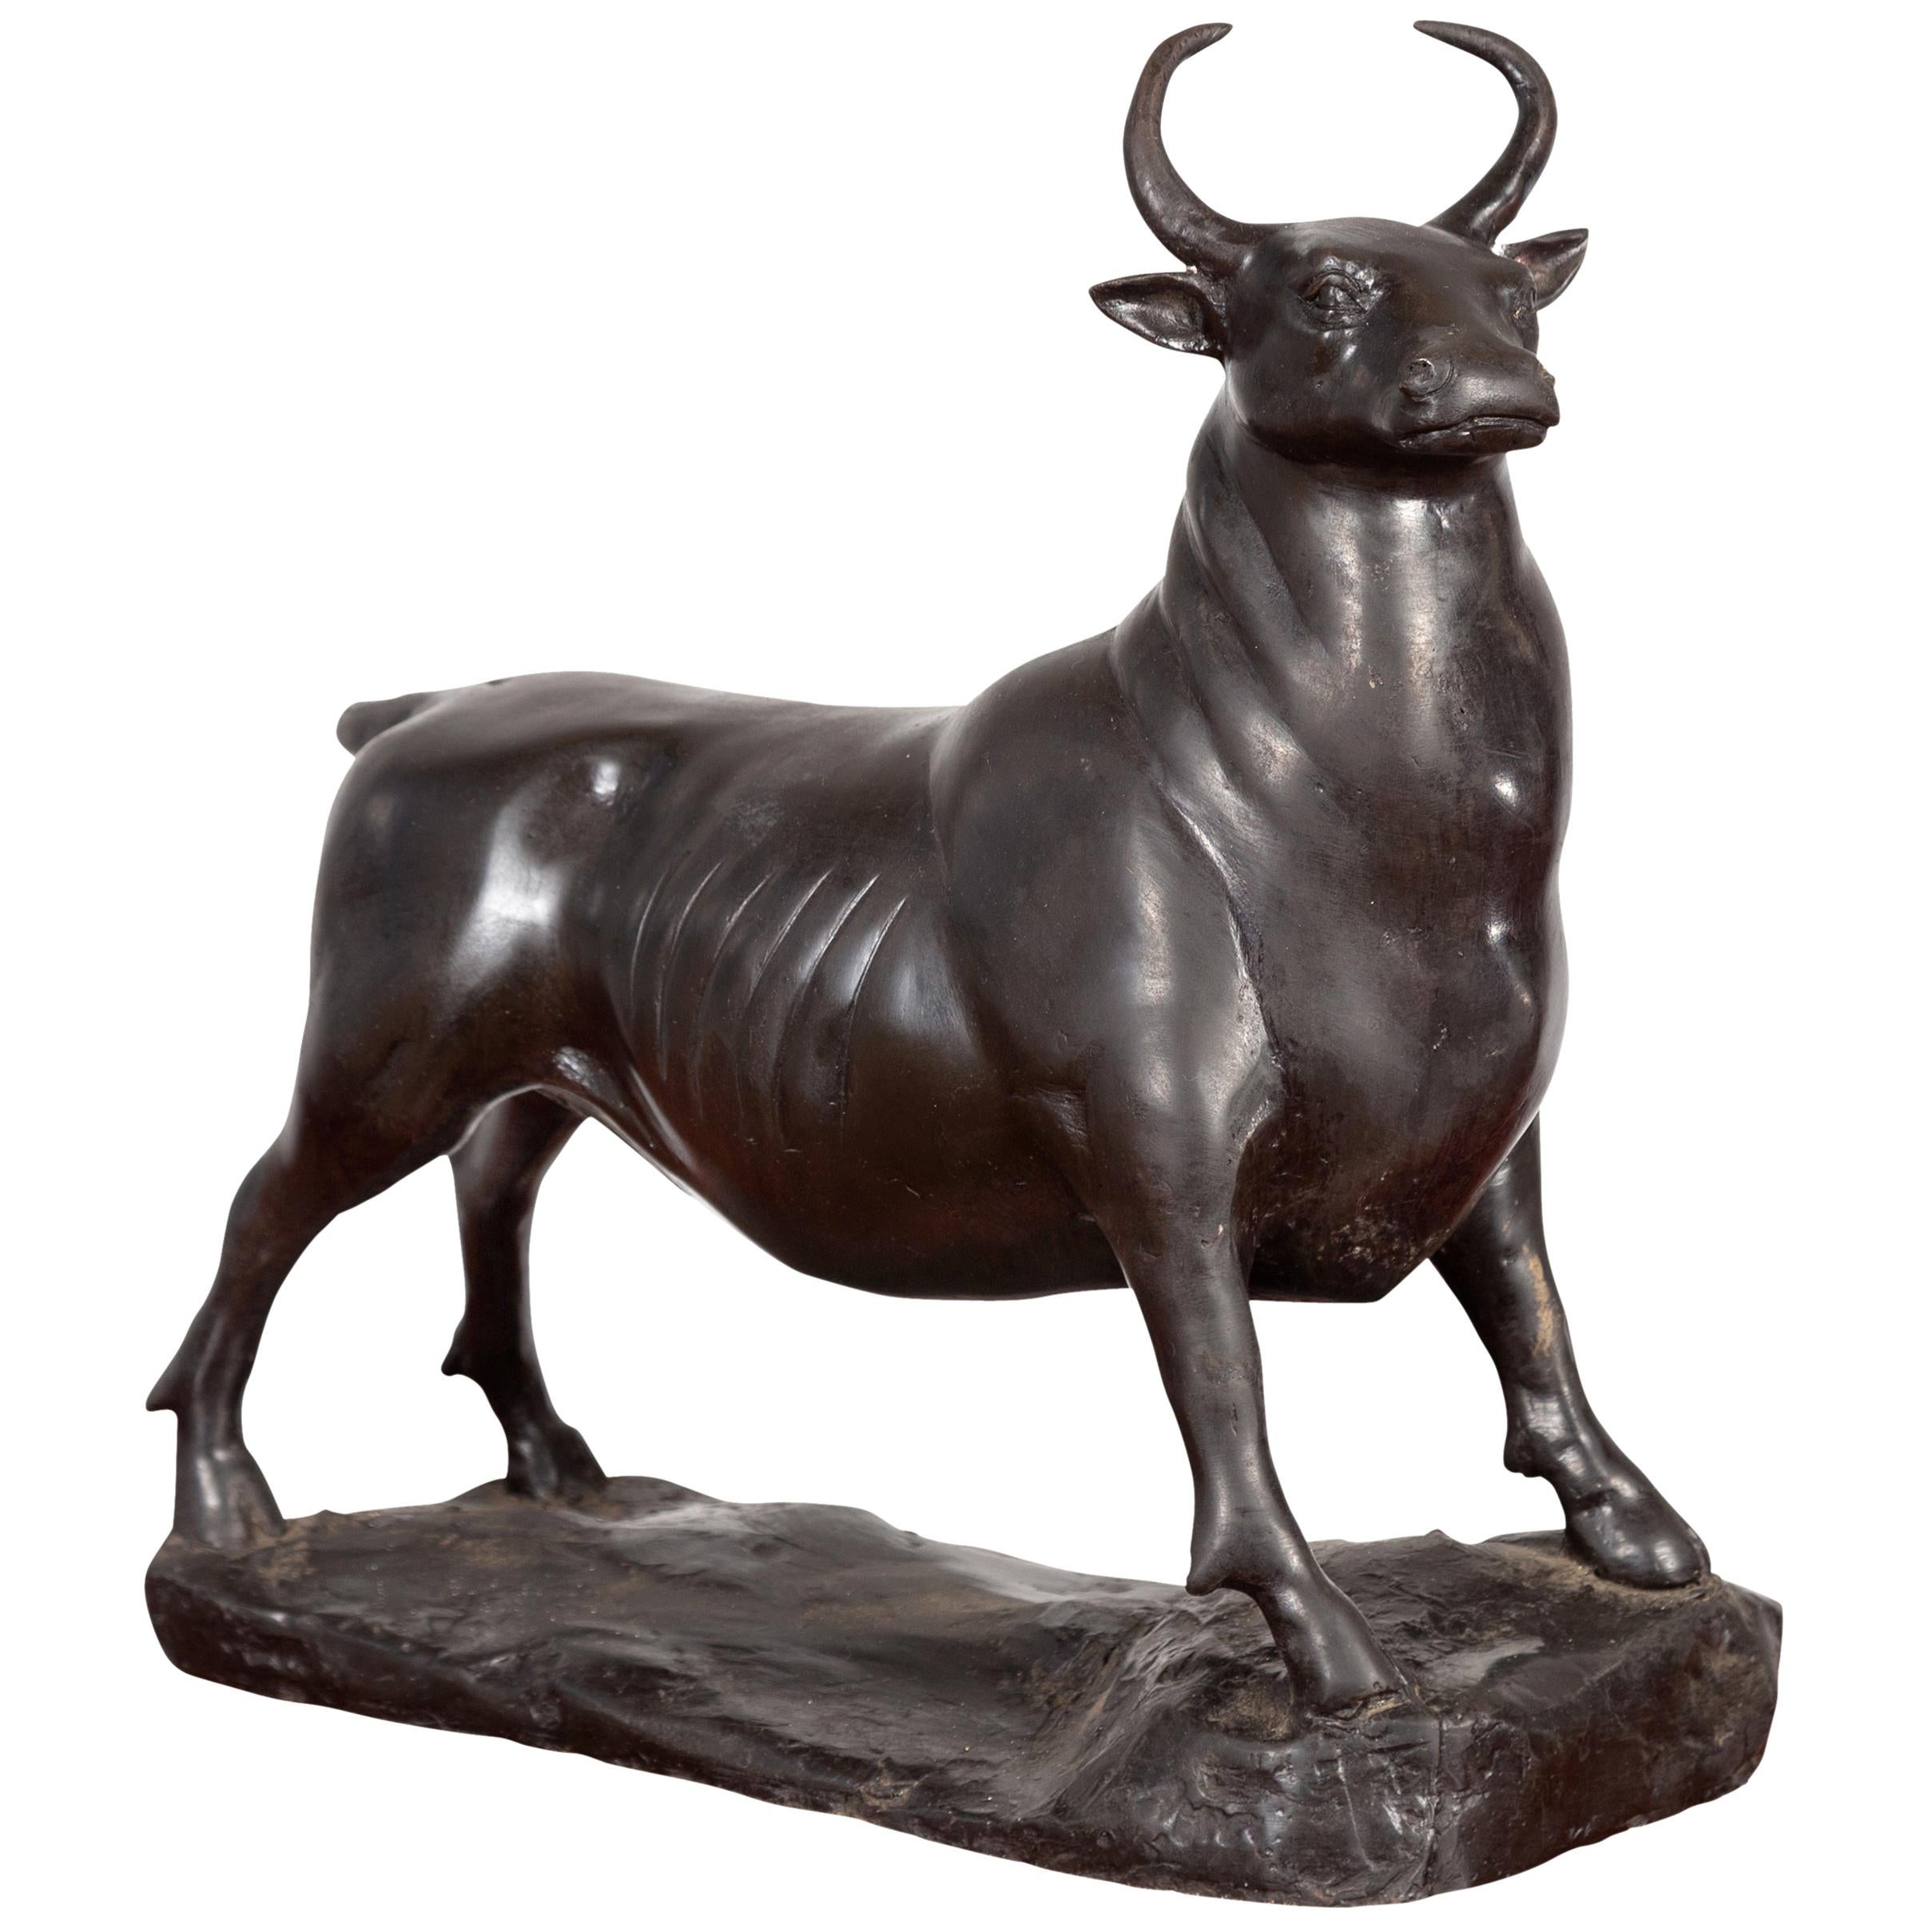 Contemporary Lost Wax Bronze Sculpture Depicting a Bull with Dark Patina For Sale